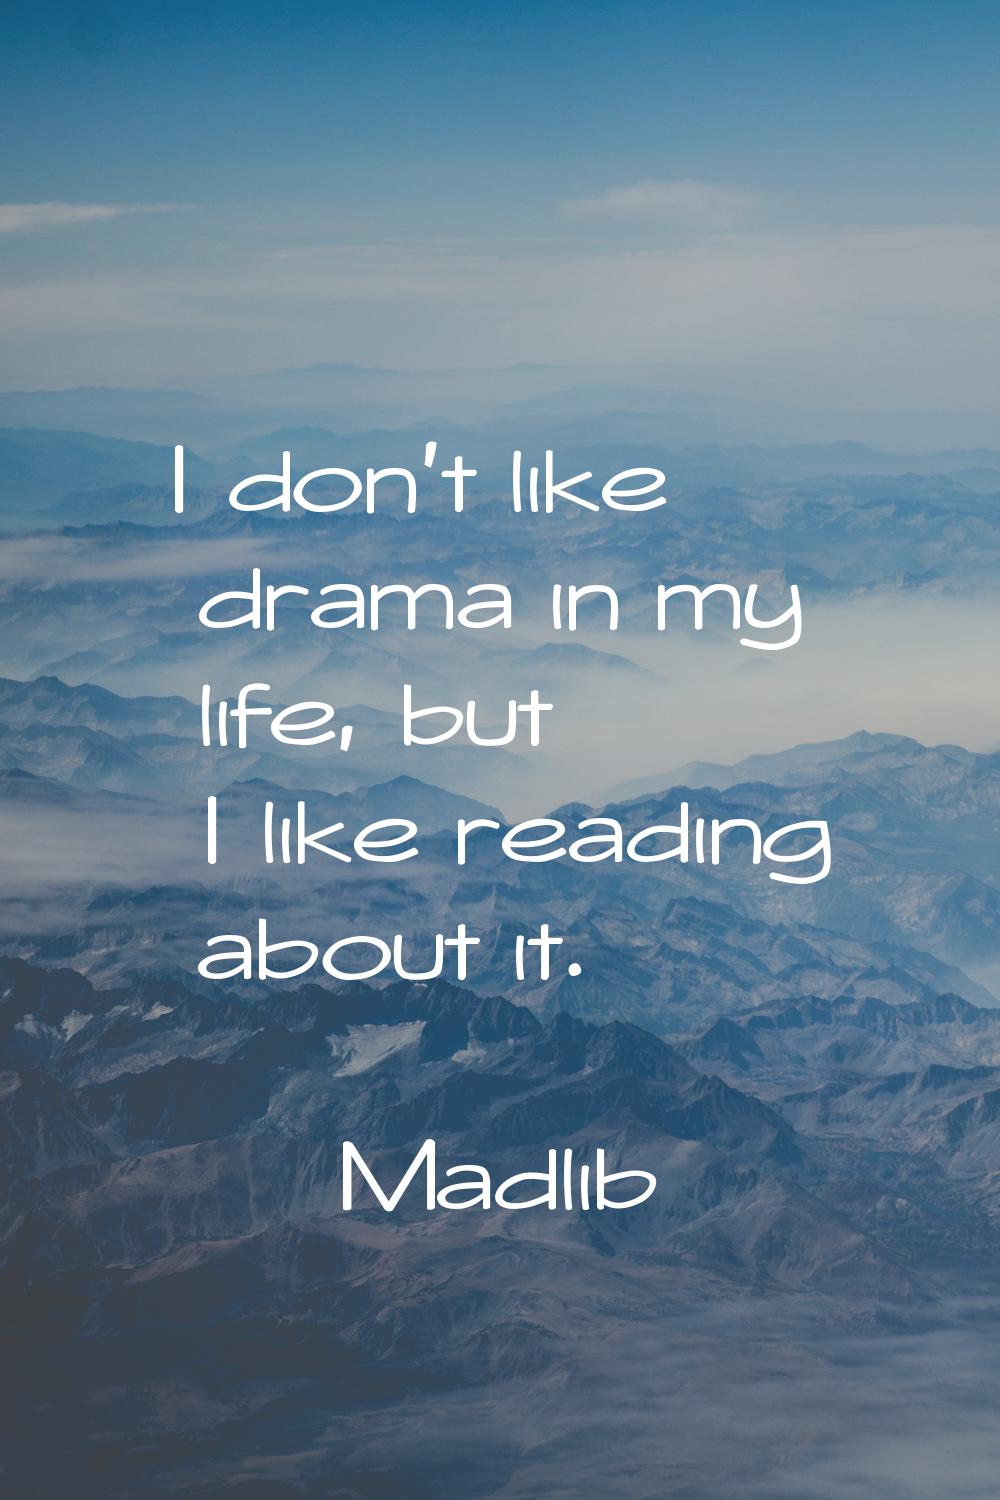 I don't like drama in my life, but I like reading about it.